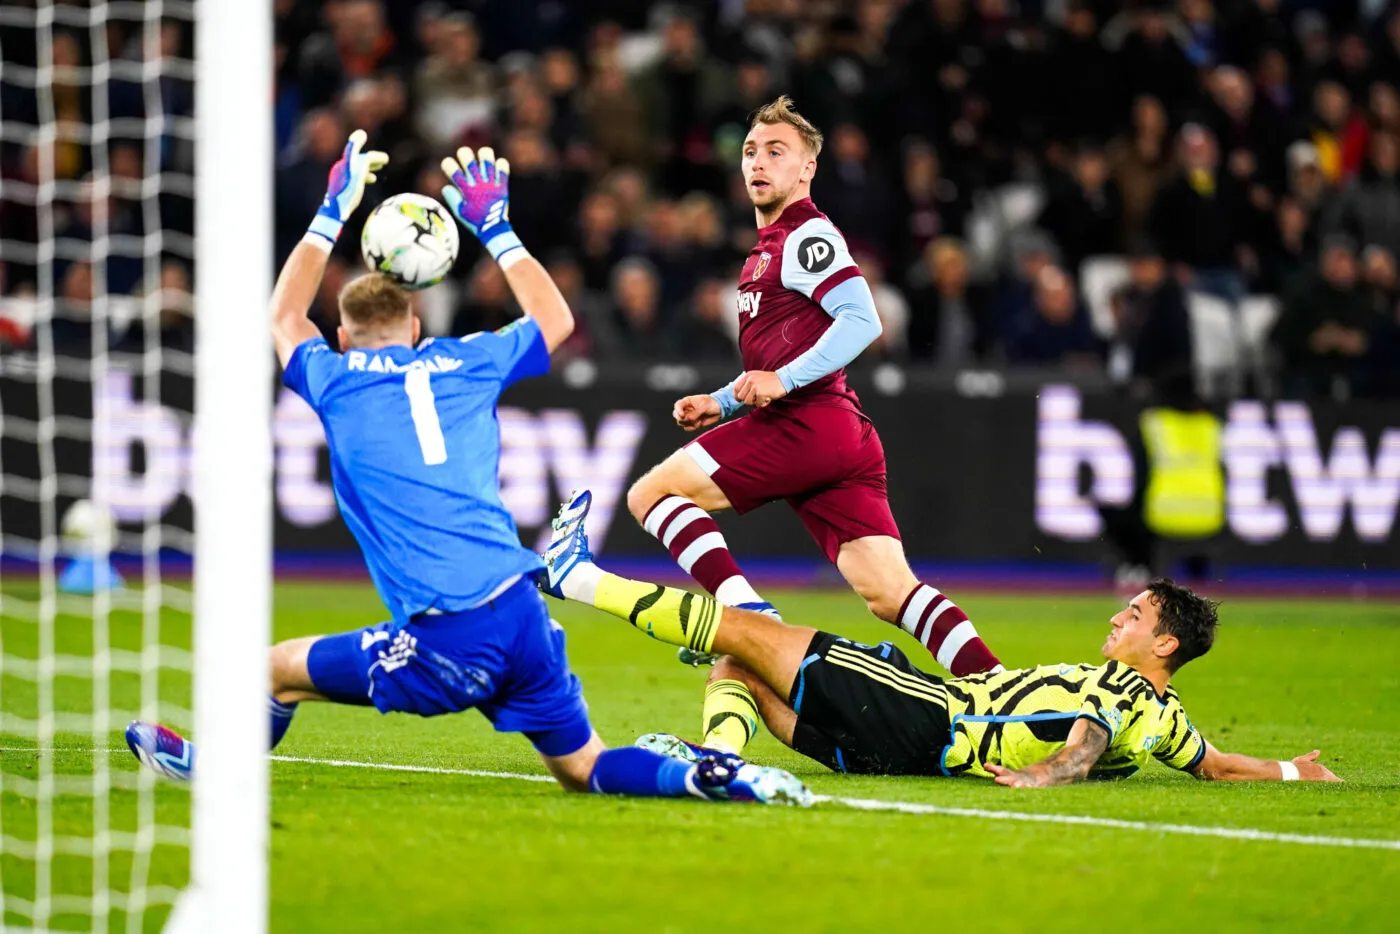 Arsenal goalkeeper Aaron Ramsdale (left) makes a save from West Ham United's Jarrod Bowen during the Carabao Cup fourth round match at the London Stadium, London. Picture date: Wednesday November 1, 2023. - Photo by Icon sport